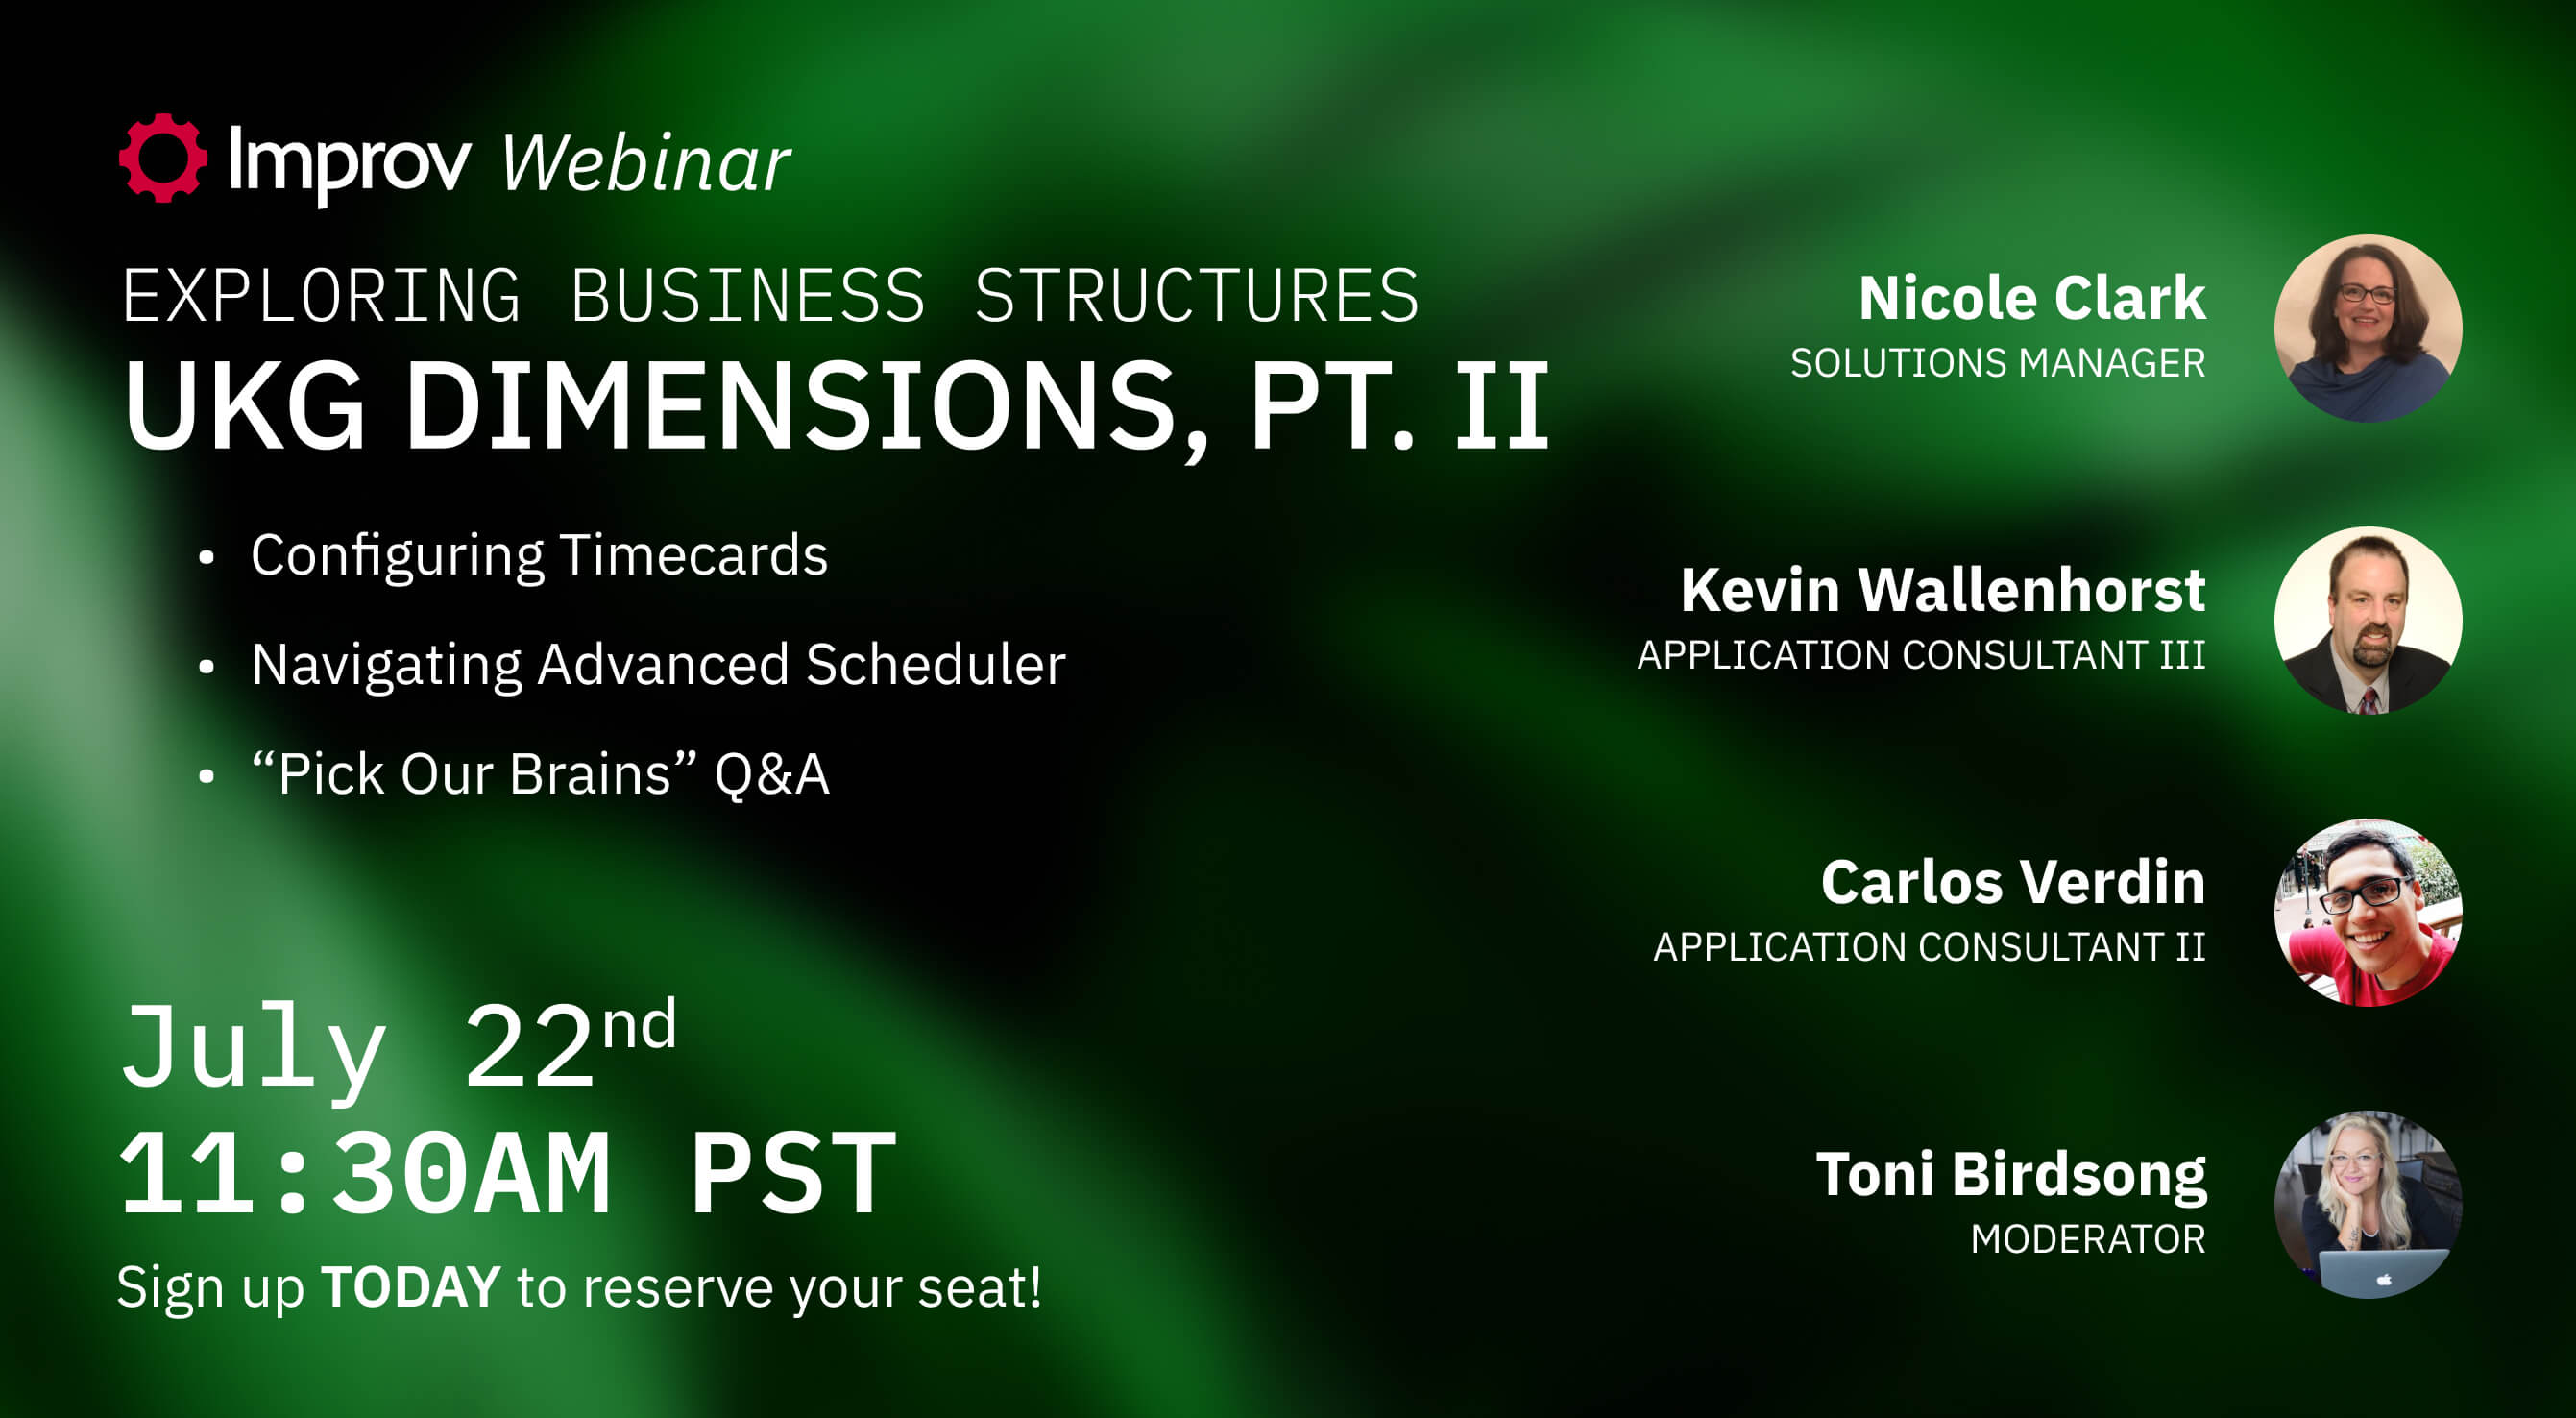 Register now to reserve your seat for this complimentary webinar. 